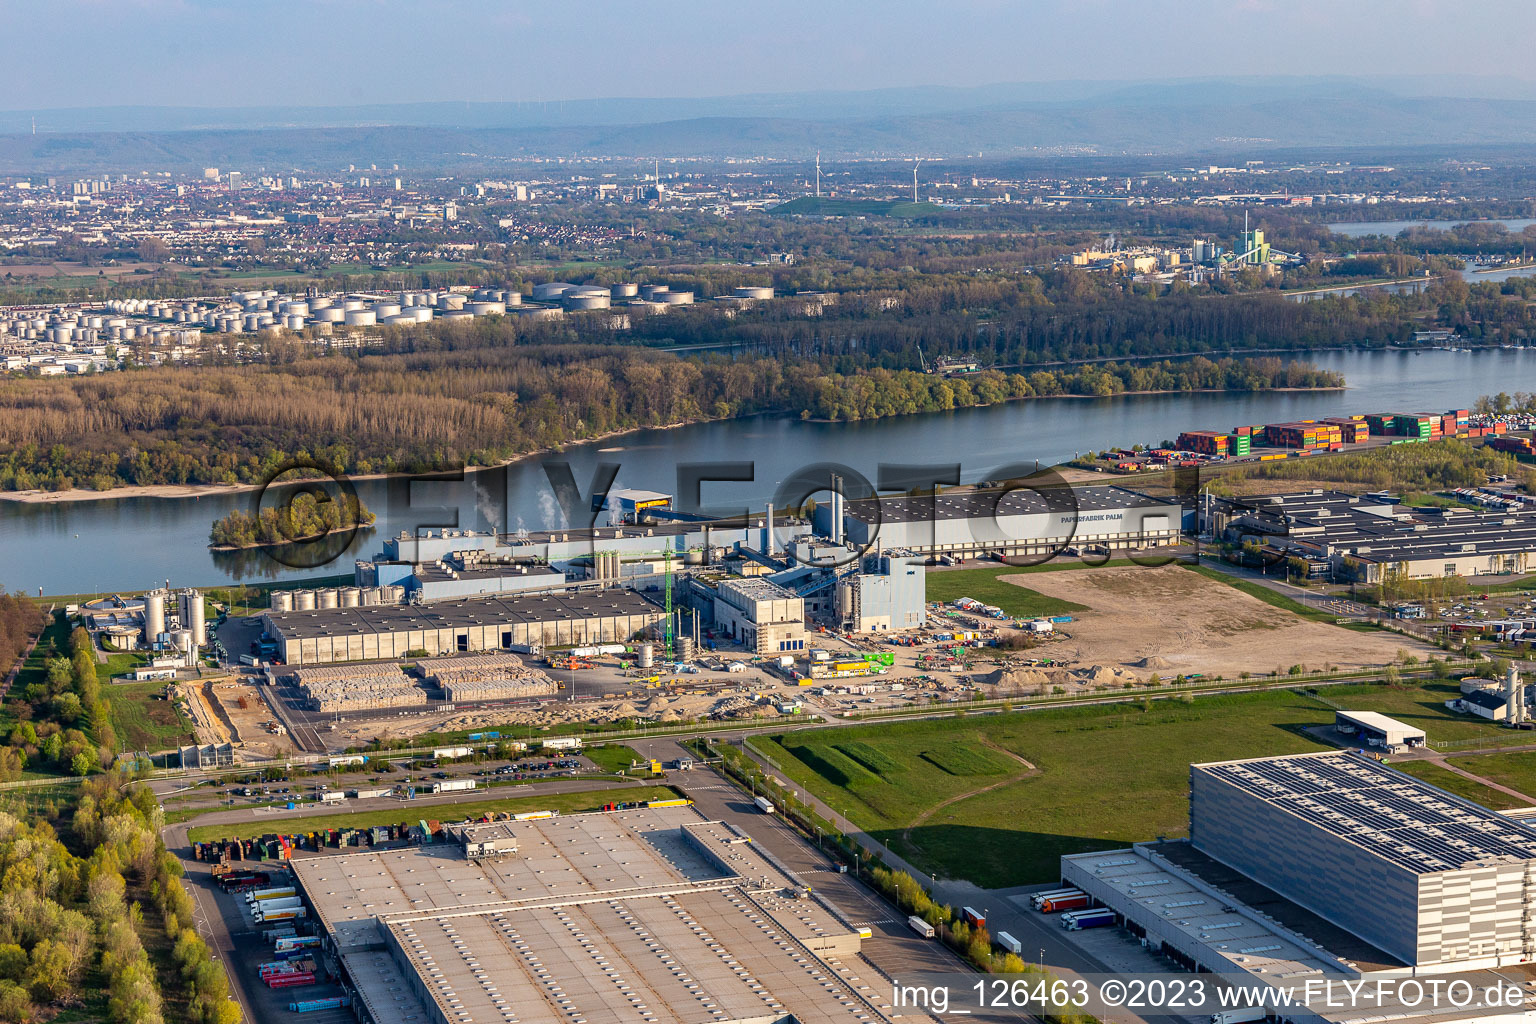 Drone image of Construction of the new gas- hydrogen-power plant at paer mill Papierfabrik Palm GmbH & Co. KG in the district Industriegebiet Woerth-Oberwald in Woerth am Rhein in the state Rhineland-Palatinate